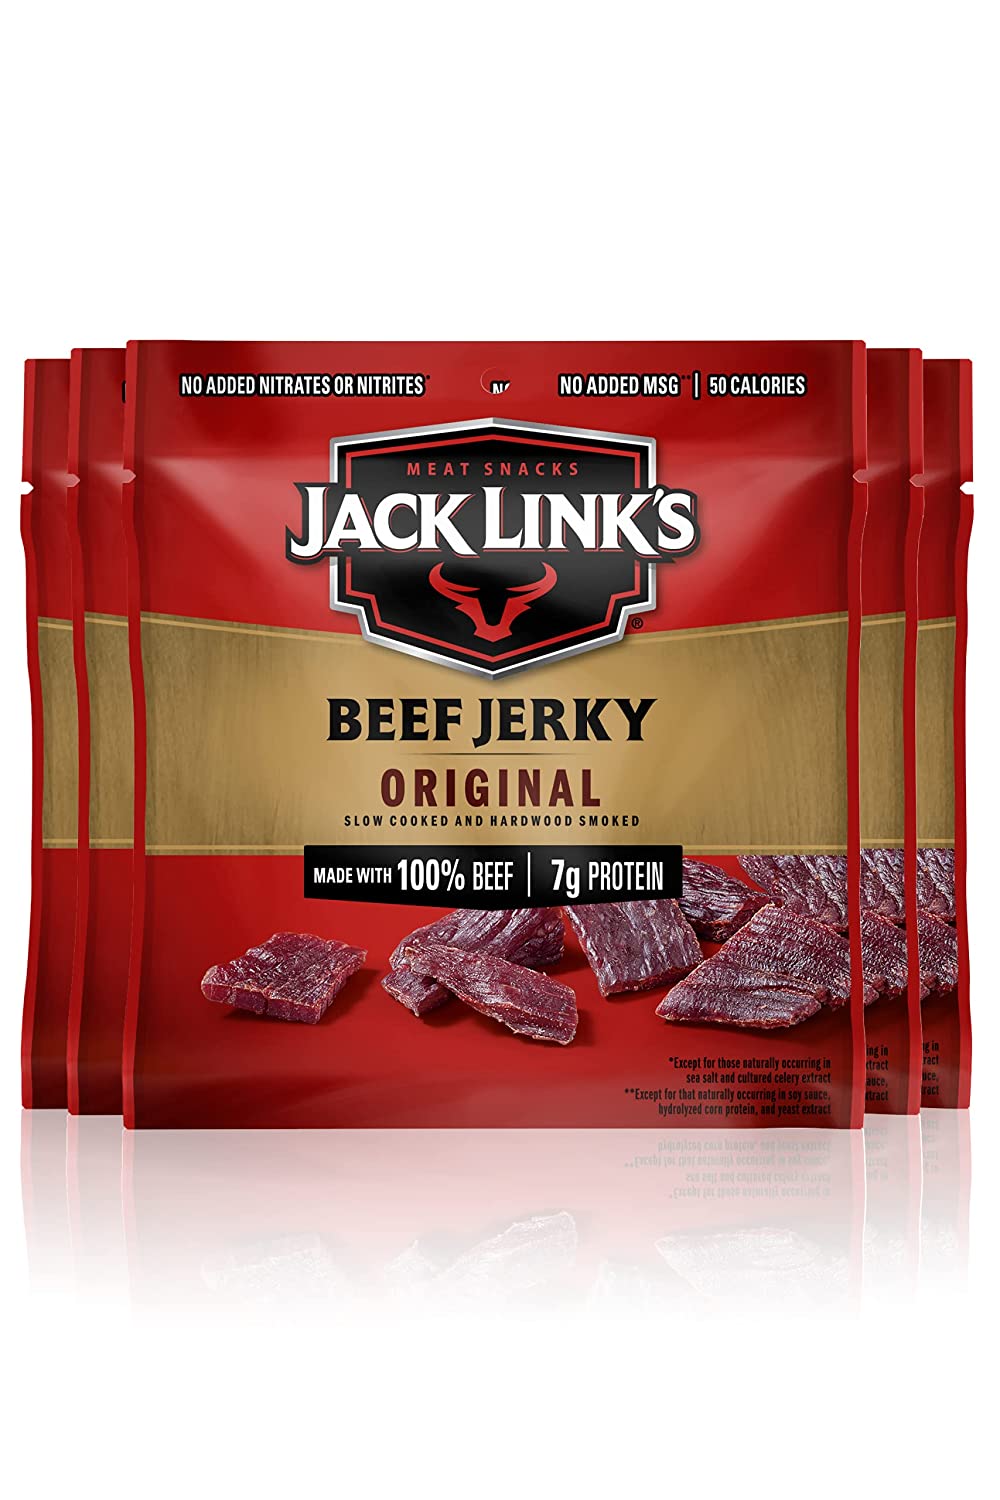 5-Ct 0.625-Oz Jack Link's Beef Jerky (Original) $4 w/ S&S + Free Shipping w/ Prime or on $25+